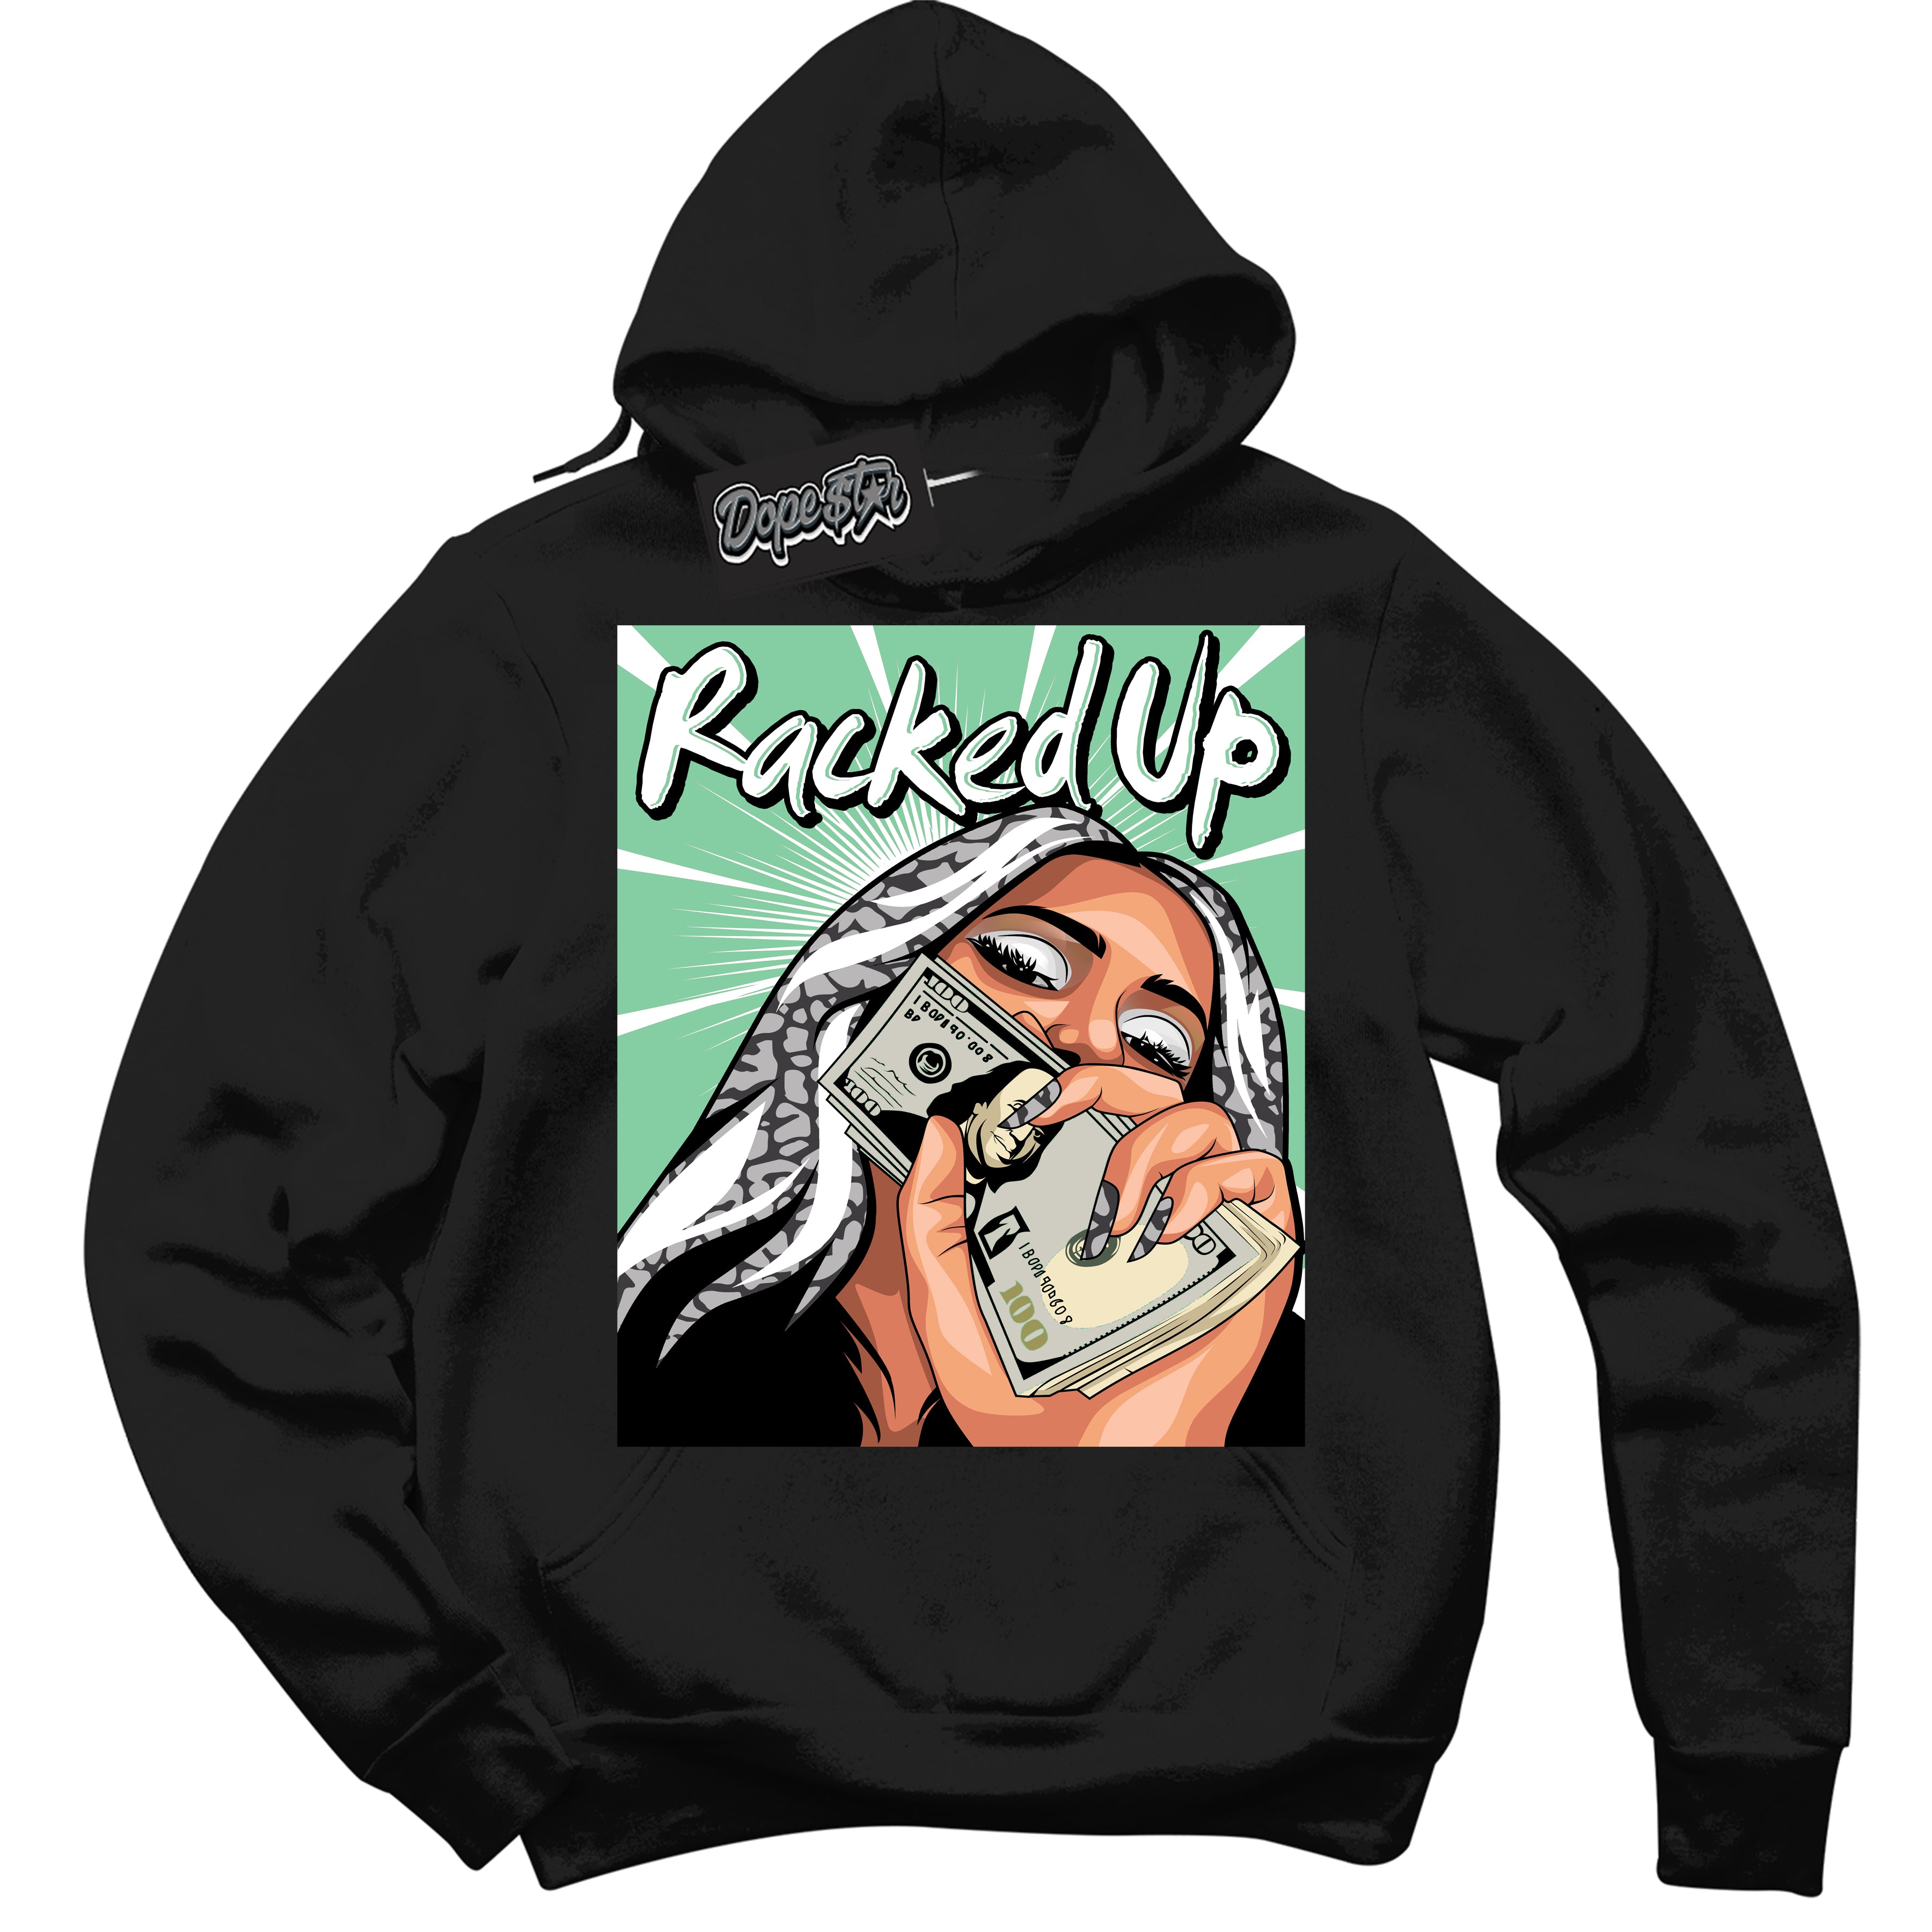 Cool Black Graphic DopeStar Hoodie with “ Racked Up “ print, that perfectly matches Green Glow 3S sneakers